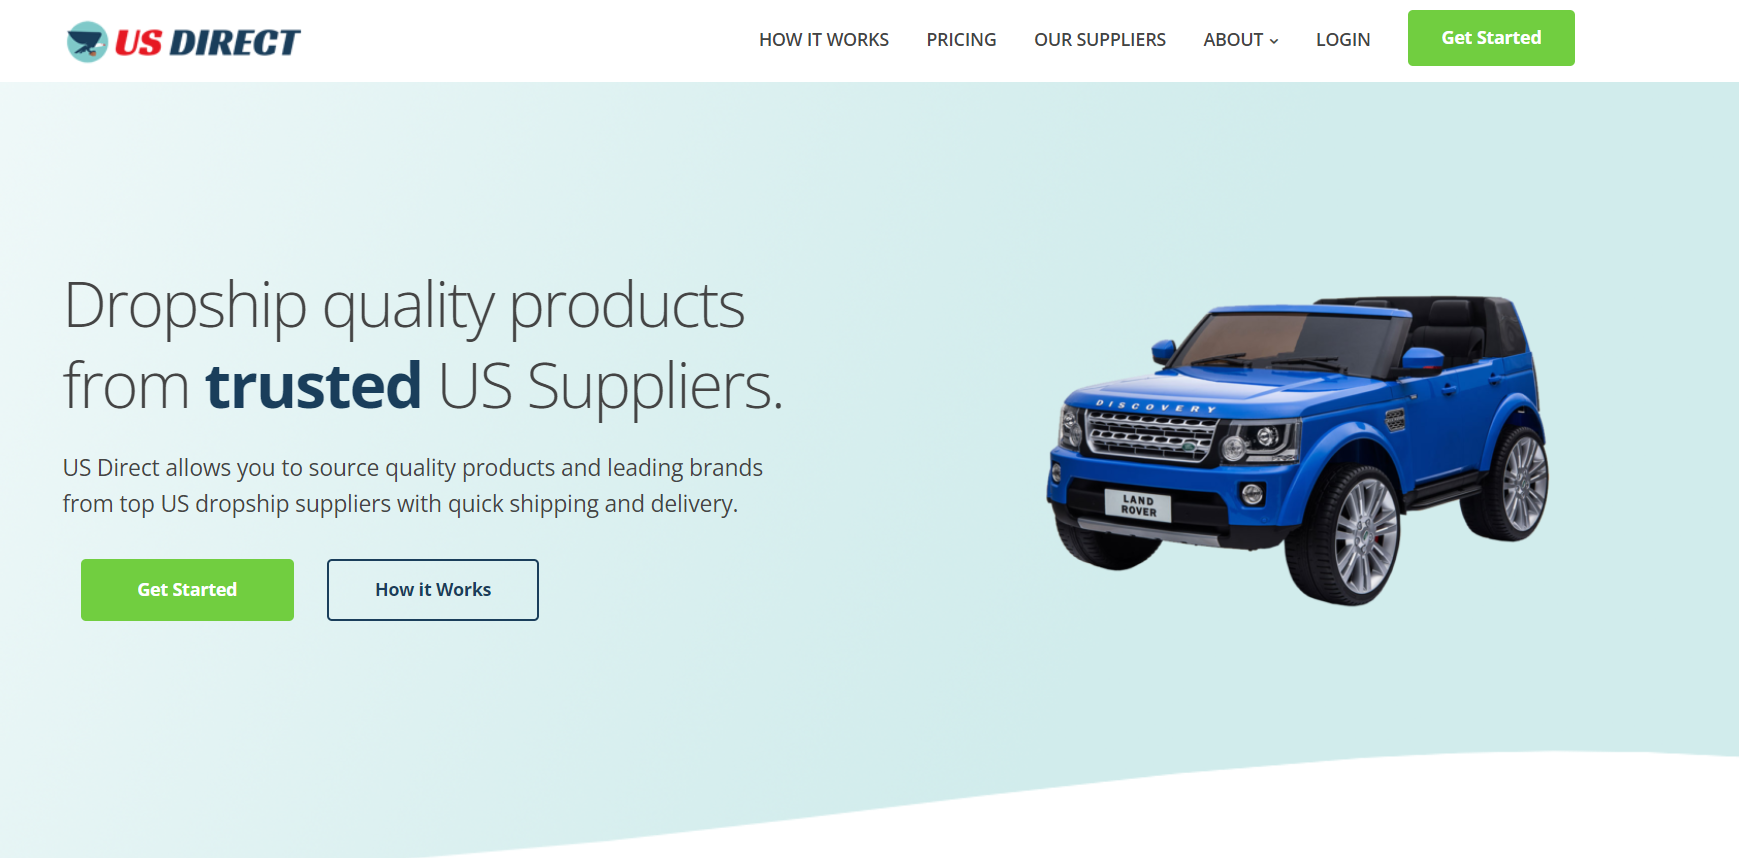 US Direct provides a seamless dropshipping experience, offering access to top-quality products and renowned brands from reliable US suppliers. Their range includes dropship toys and various other categories. 